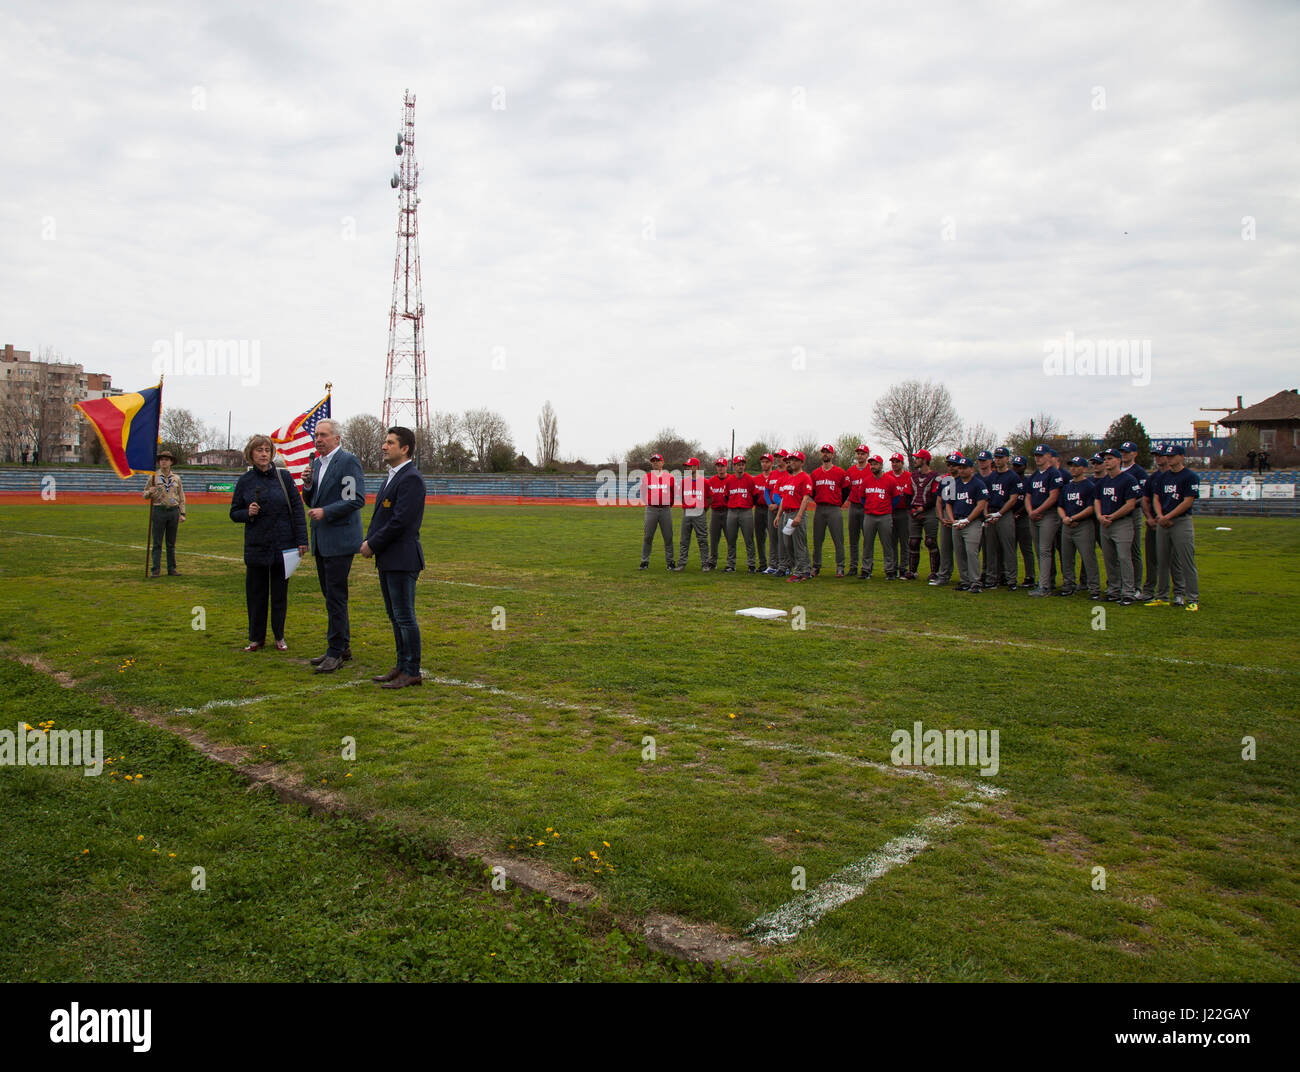 The Ambassador of the United States to Romania, Hans G. Klemm (middle) and the mayor of Constanta, Decebal Fagadau (right) address spectators and U.S. Marines with Black Sea Rotational Force 17.1 at the Jackie Robinson Day baseball game between the U.S. Marines and a Romanian team in Constanta, Romania, April 15, 2017. The Marine and Romanian players all wore the number 42 jersey in honor of the 70th anniversary of Robinson becoming the first African American player in the Major League Baseball history. (U.S. Marine Corps photo by Cpl. Emily Dorumsgaard) Stock Photo